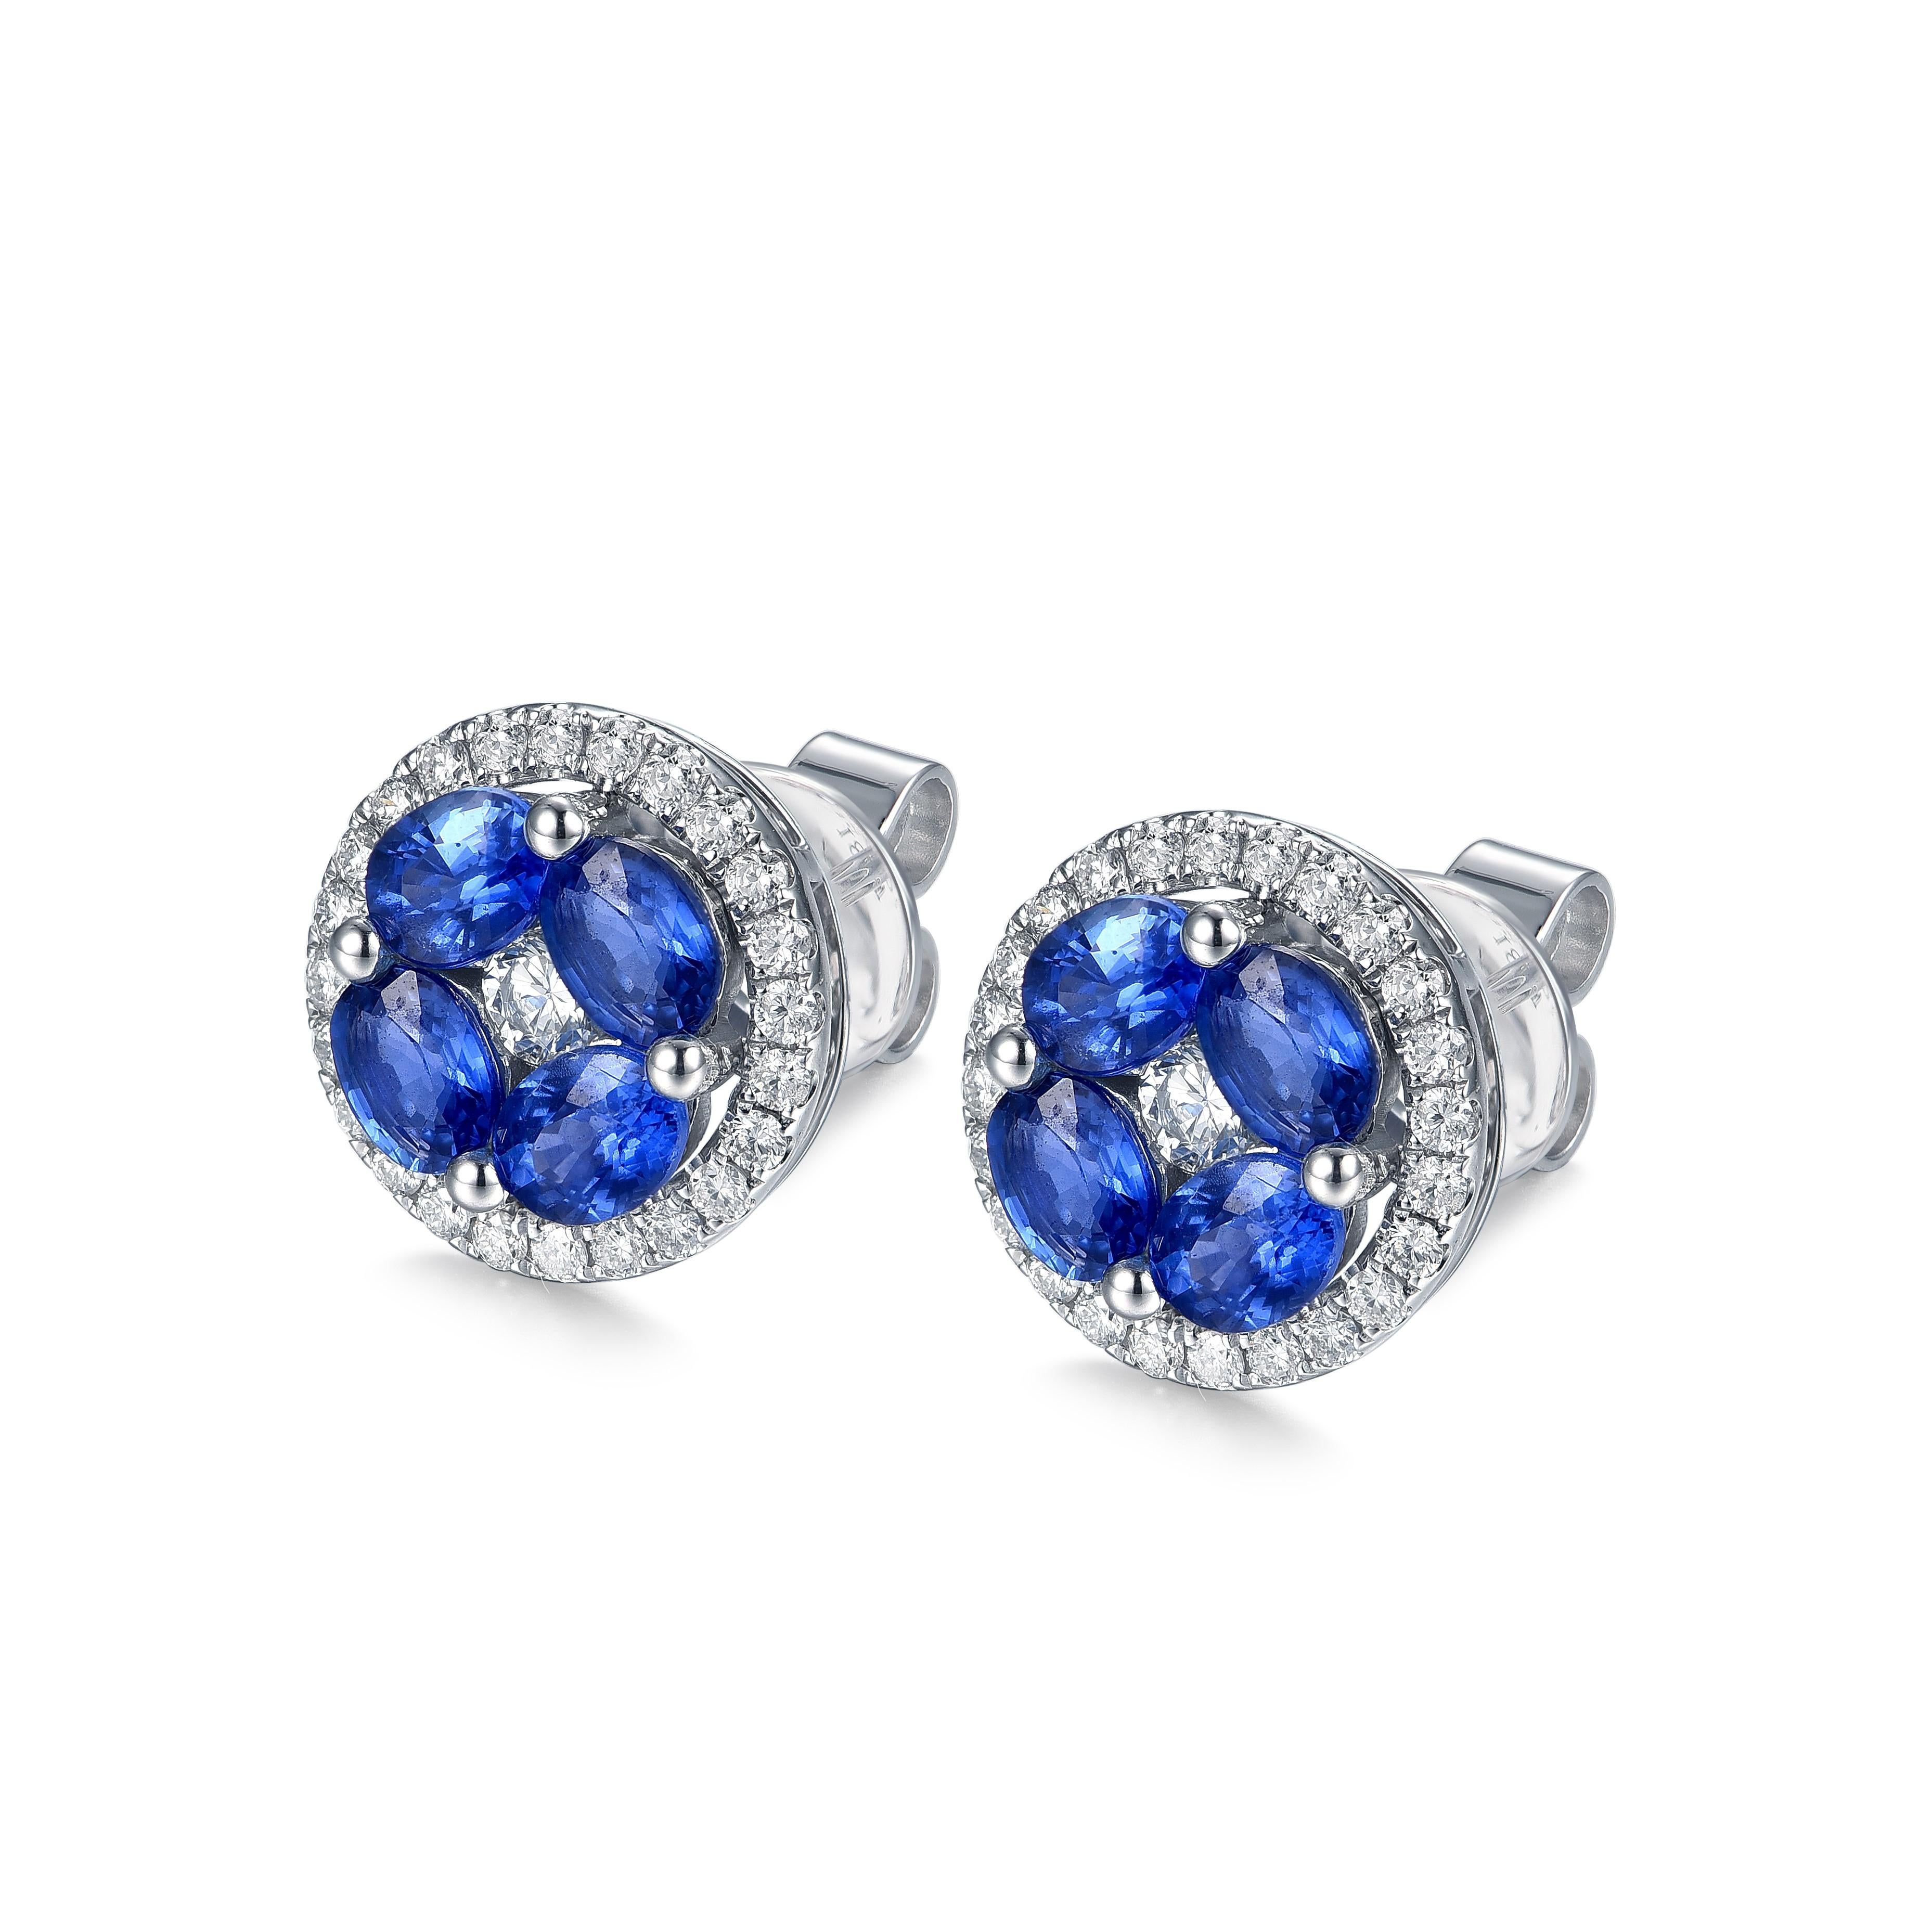 Each earring has 4 beautiful blue 4x3mm oval sapphires surrounded by a halo of .26cts diamonds set in 18k white gold.  They are a great everyday earring. They sit flat on the ear making them comfortable to wear while doing everyday activities.  